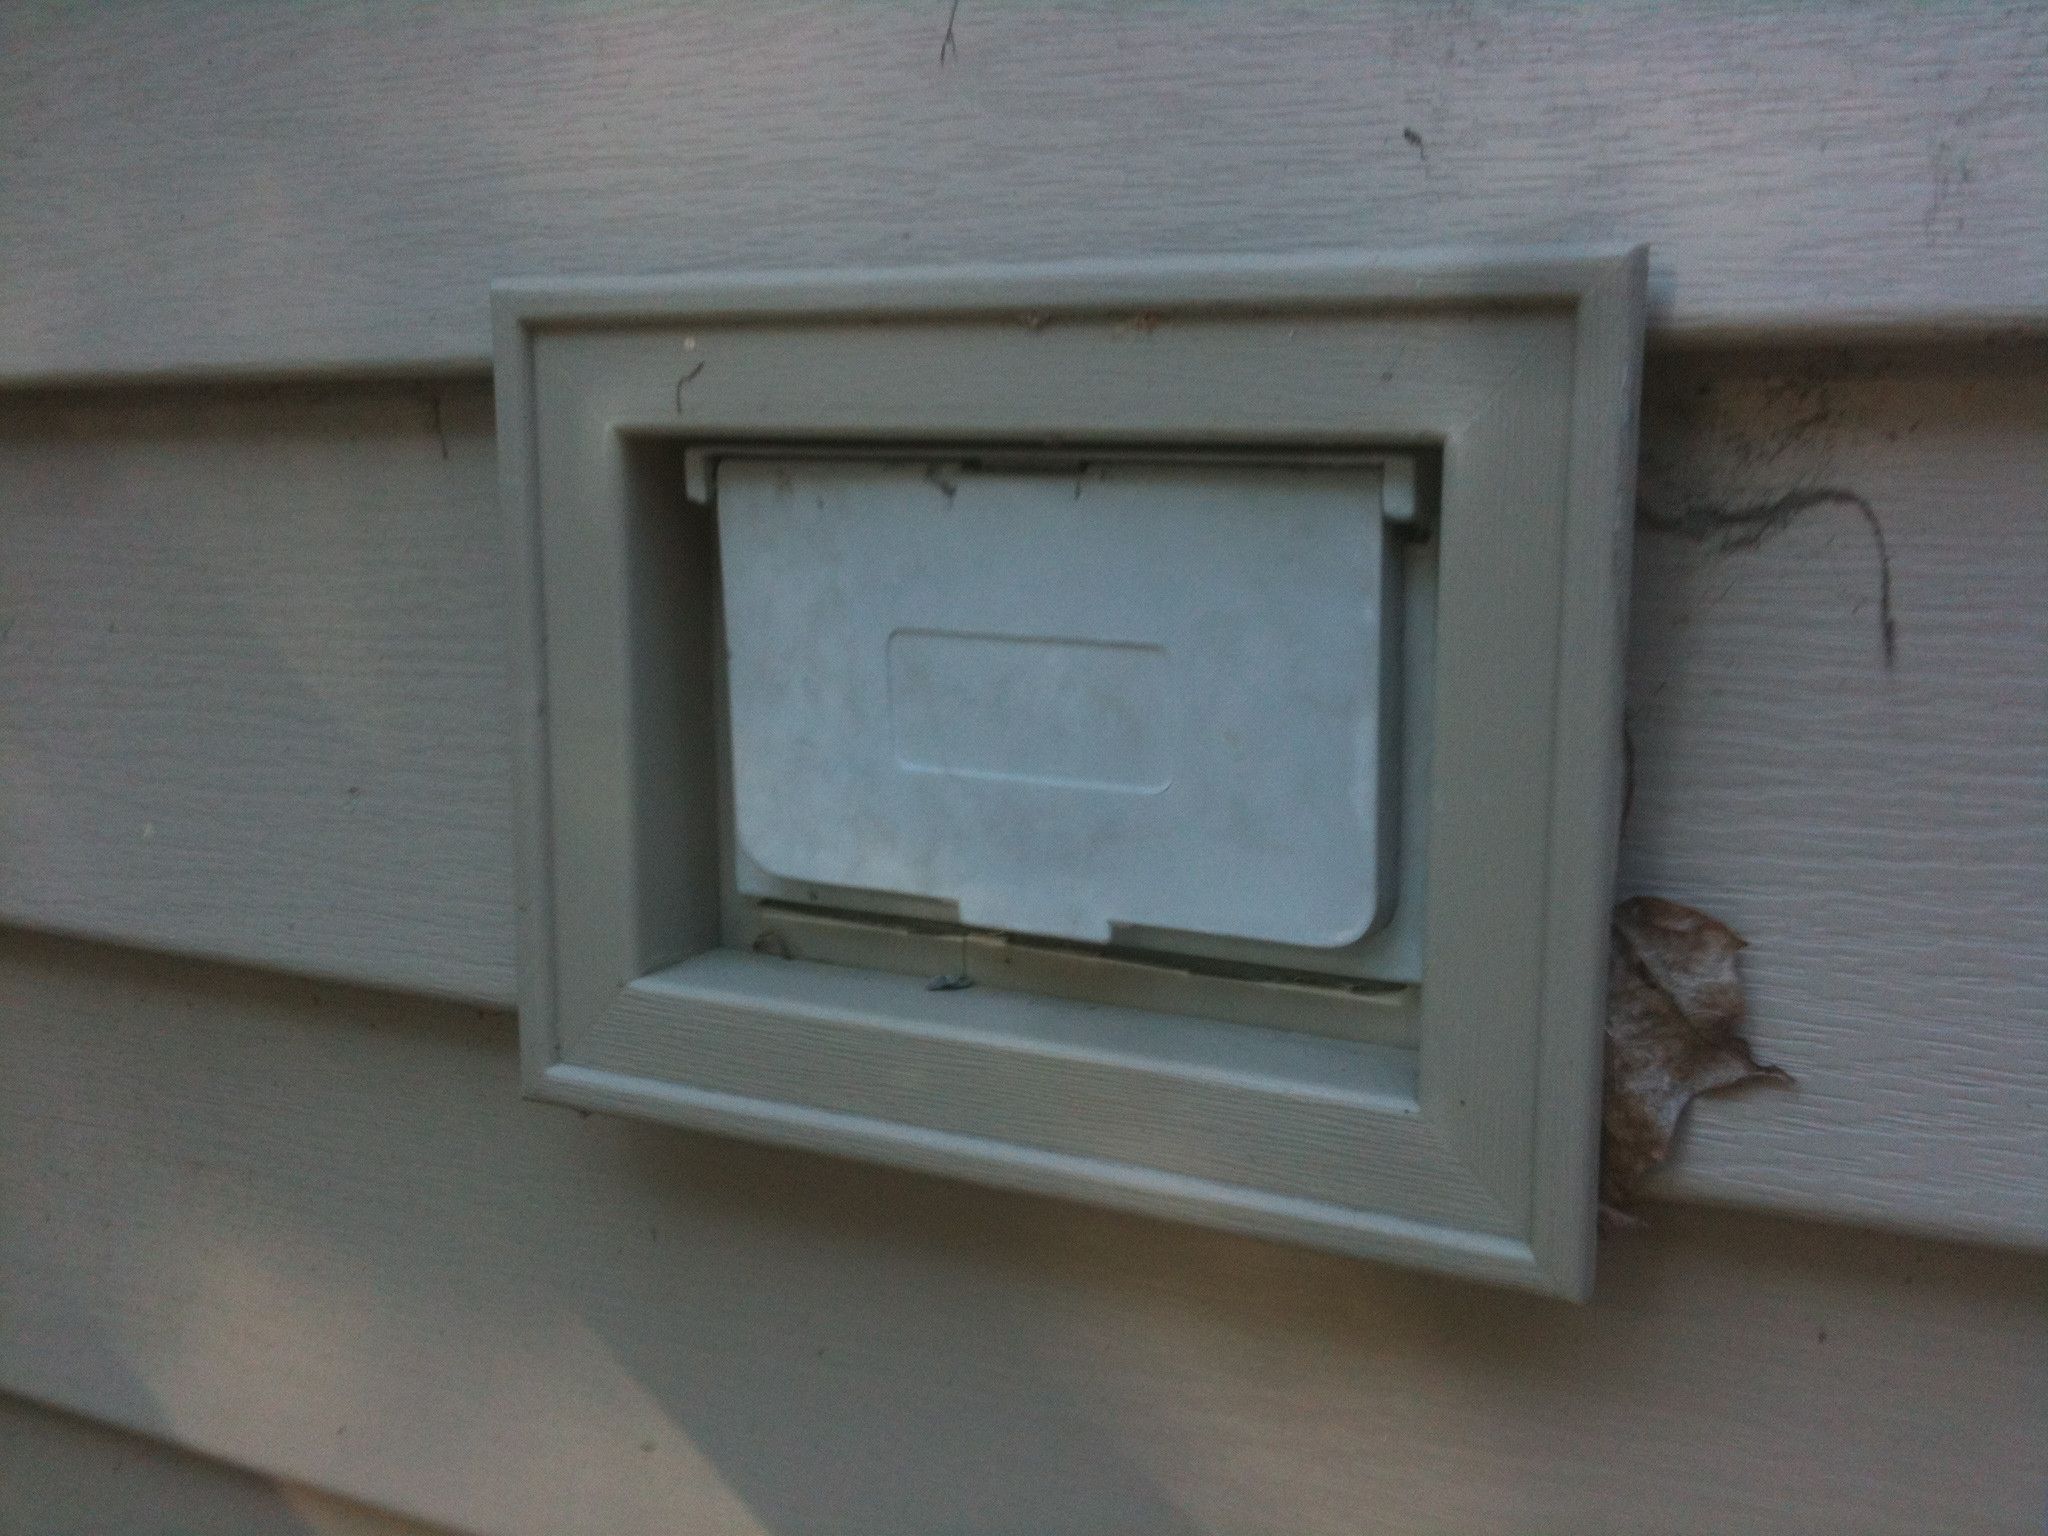 How Do I Install An Outdoor Receptacle Box On Vinyl Siding? – Home With Regard To Hanging Outdoor Lights On Vinyl Siding (View 13 of 15)